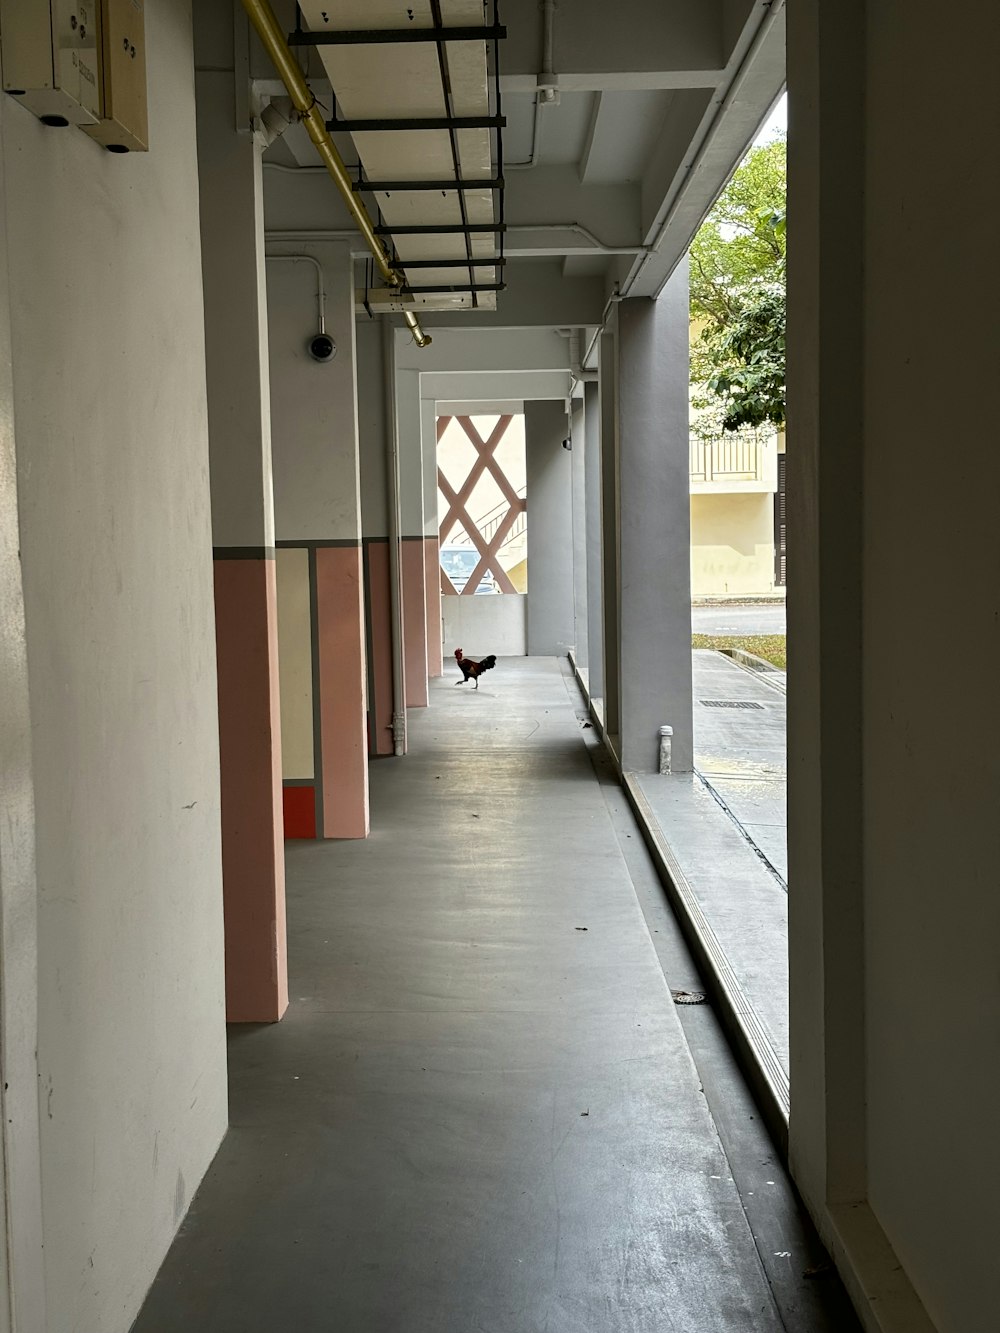 a long hallway with a cat sitting on the floor